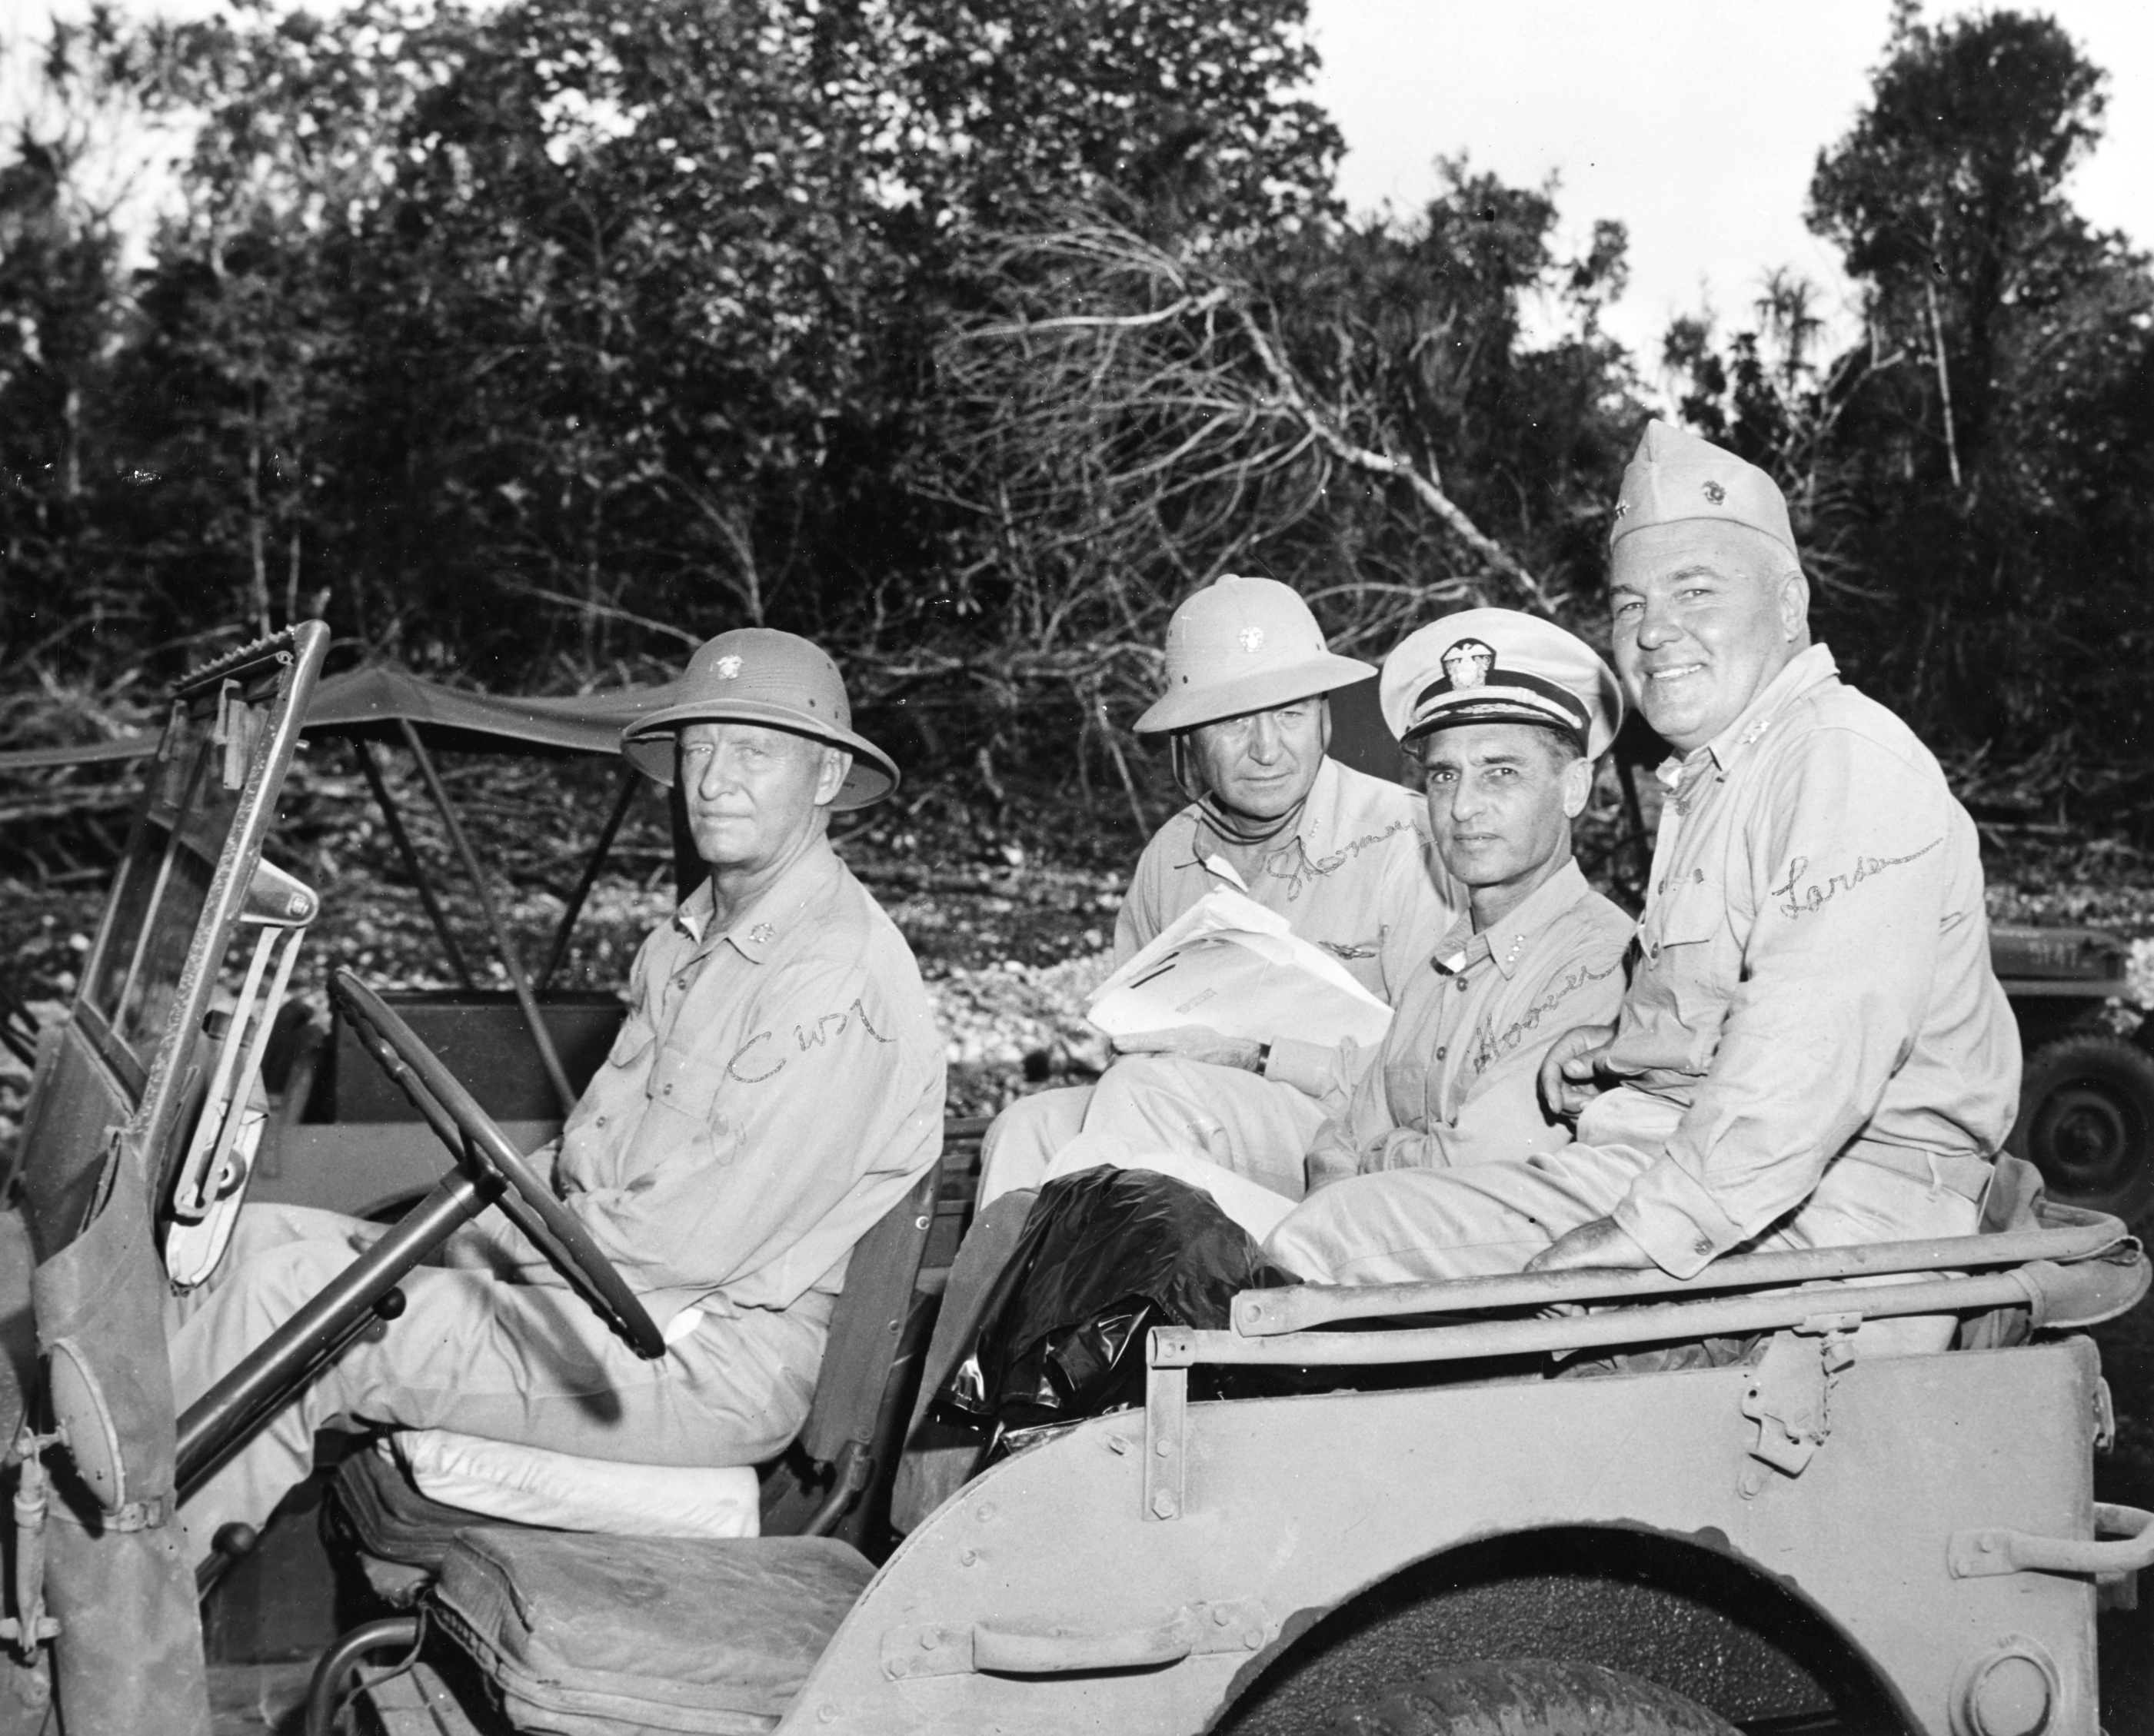 Fleet Admiral Chester Nimitz and staff officers in a Jeep at Nimitz’ new forward headquarters on Guam, Mariana Islands, Apr-May 1945.